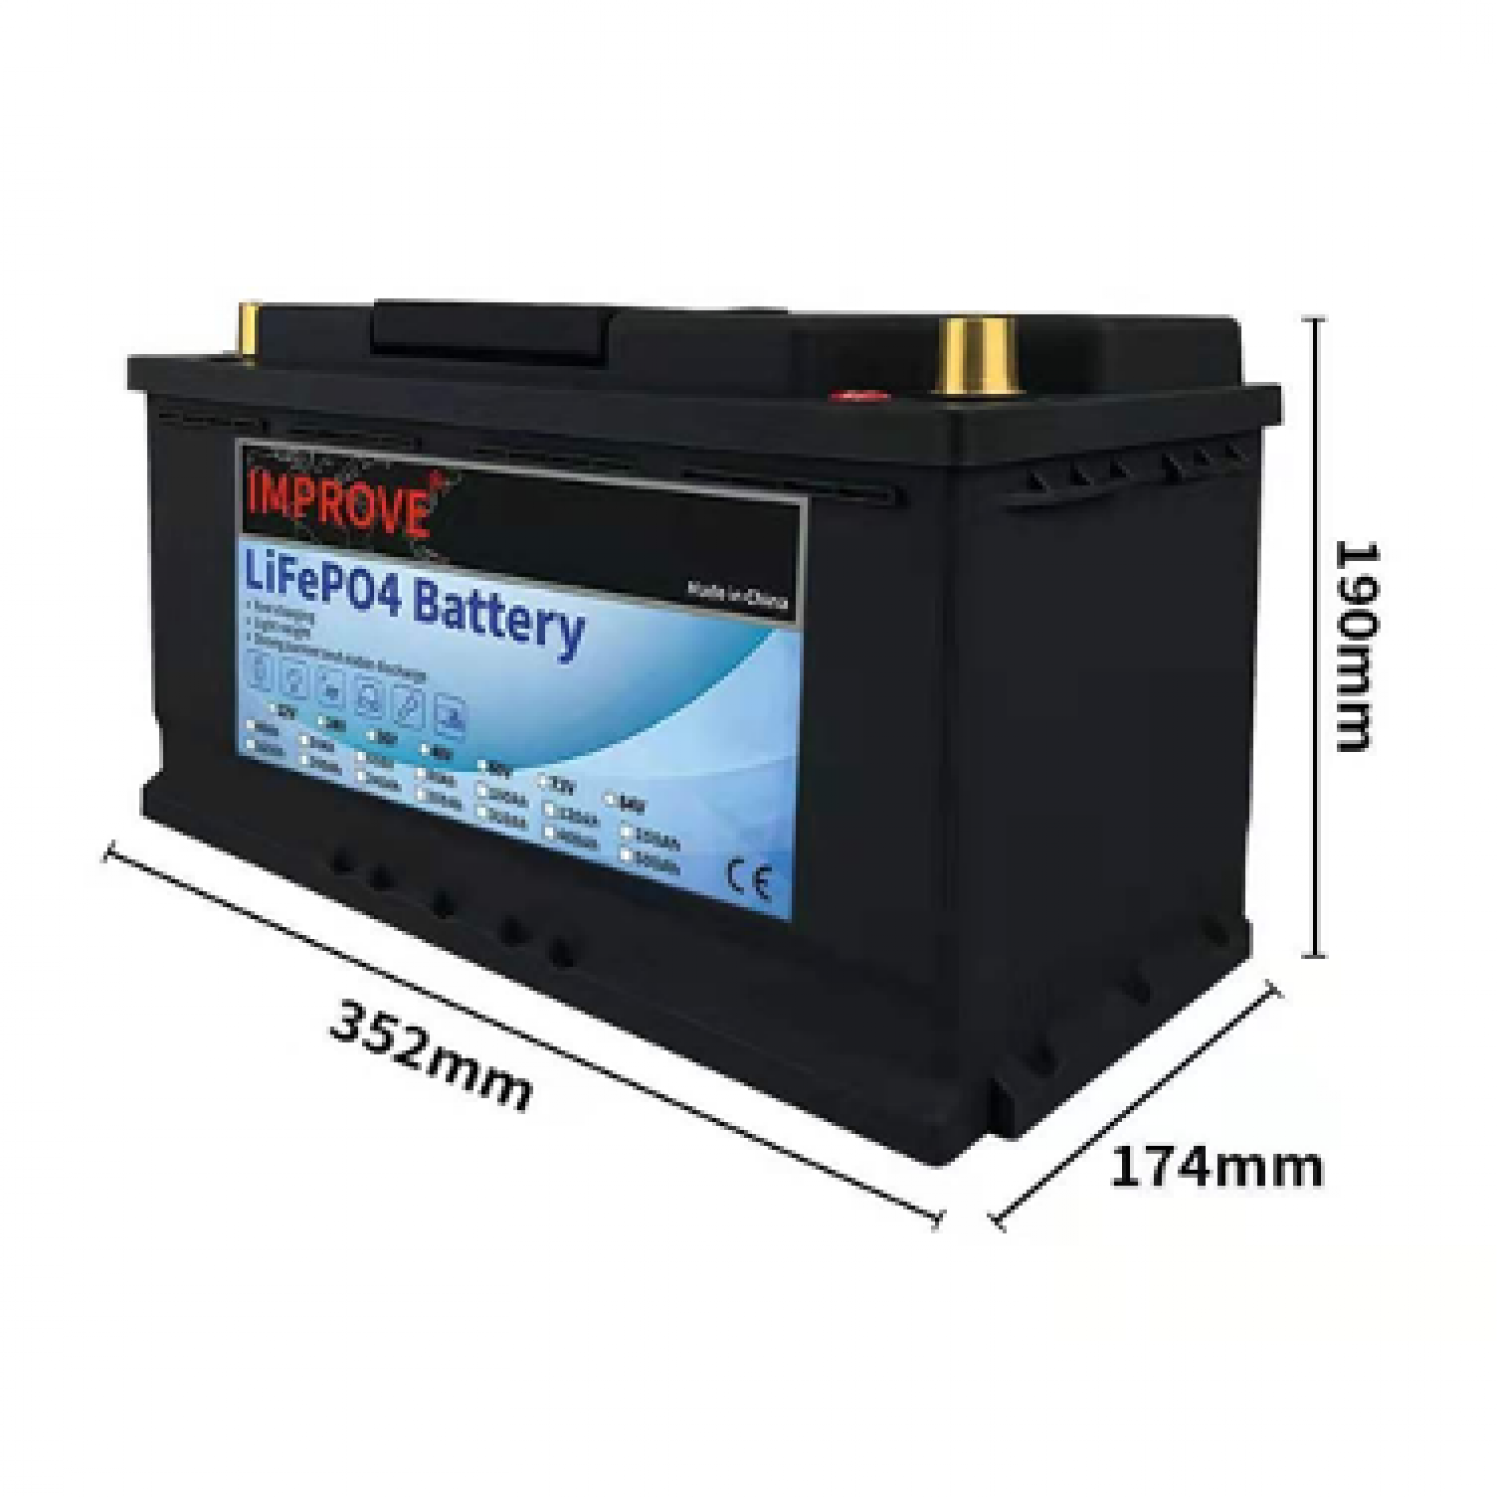 Our 36v100ah lithium battery supplies power for your weekend!--IMPROVE BATTERY